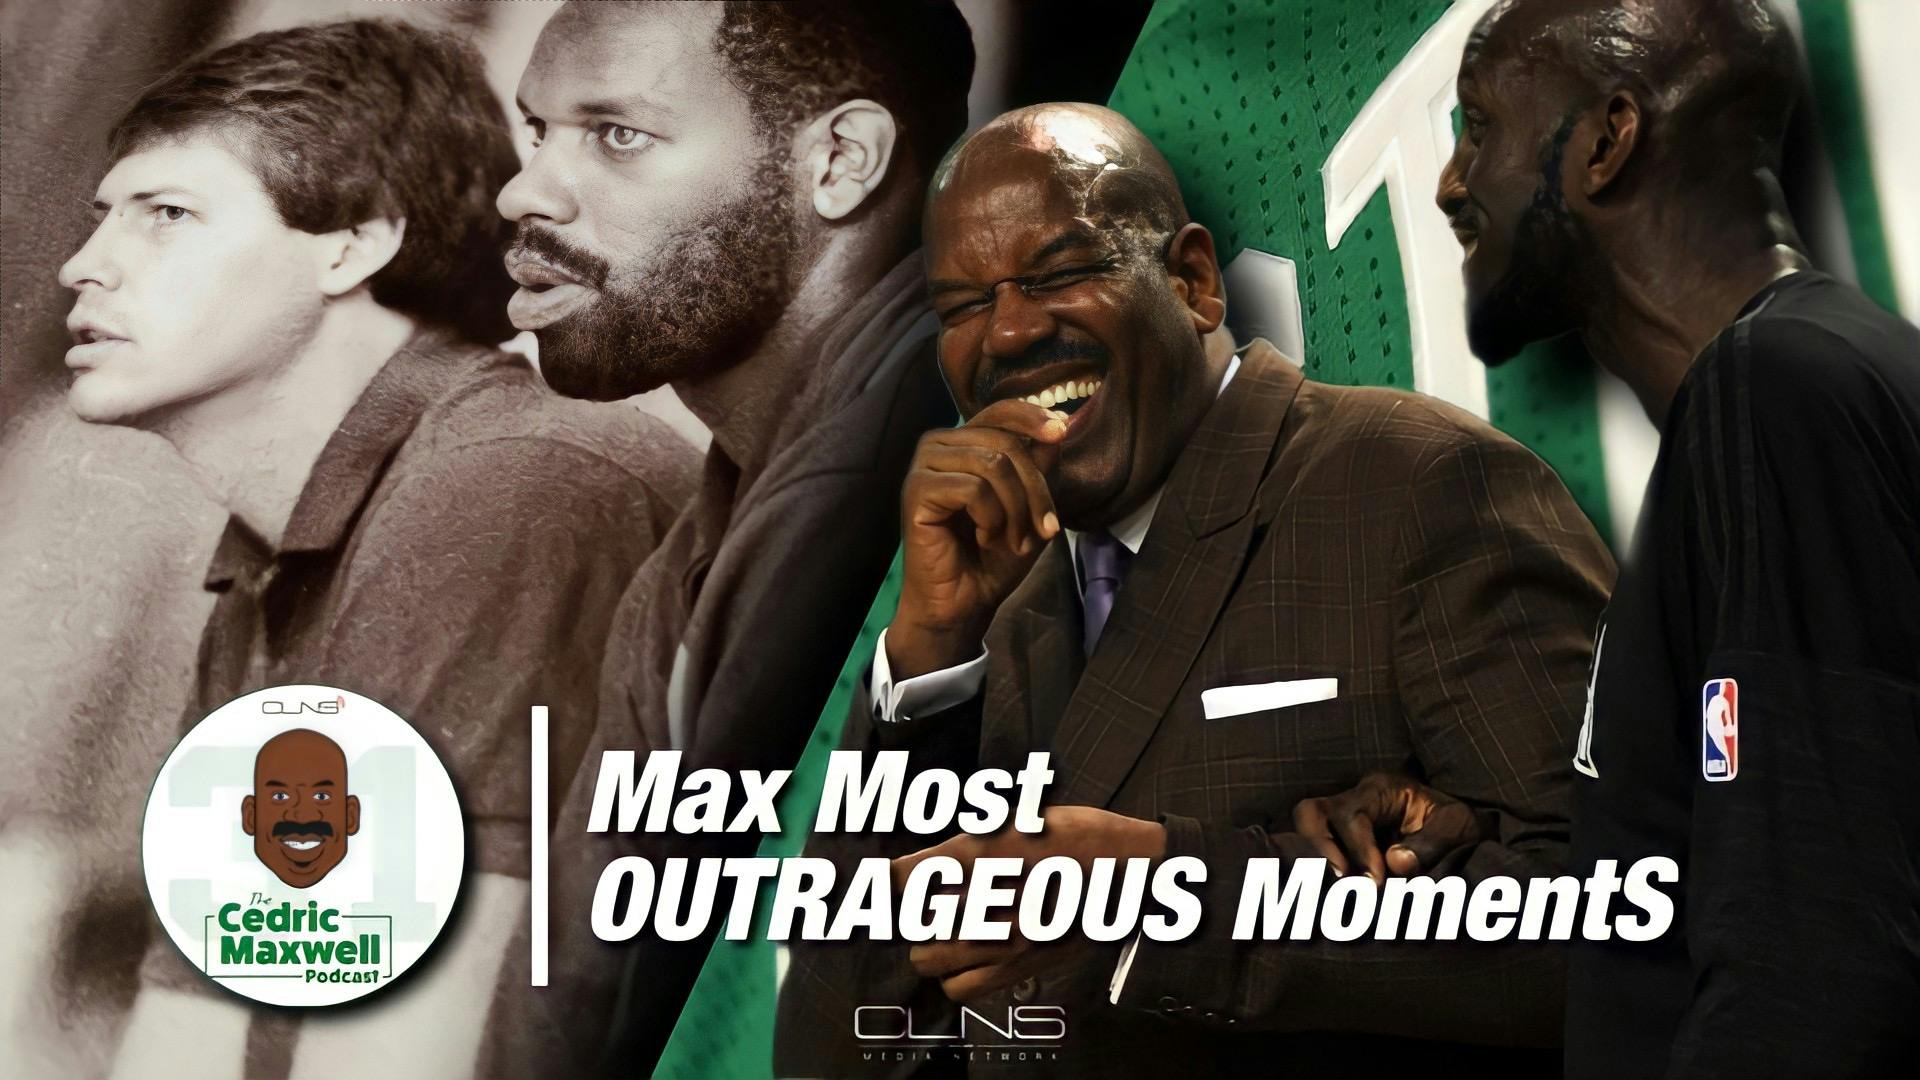 Max Most Hilarious Moments: Cornbread's Greatest Stories (lol)